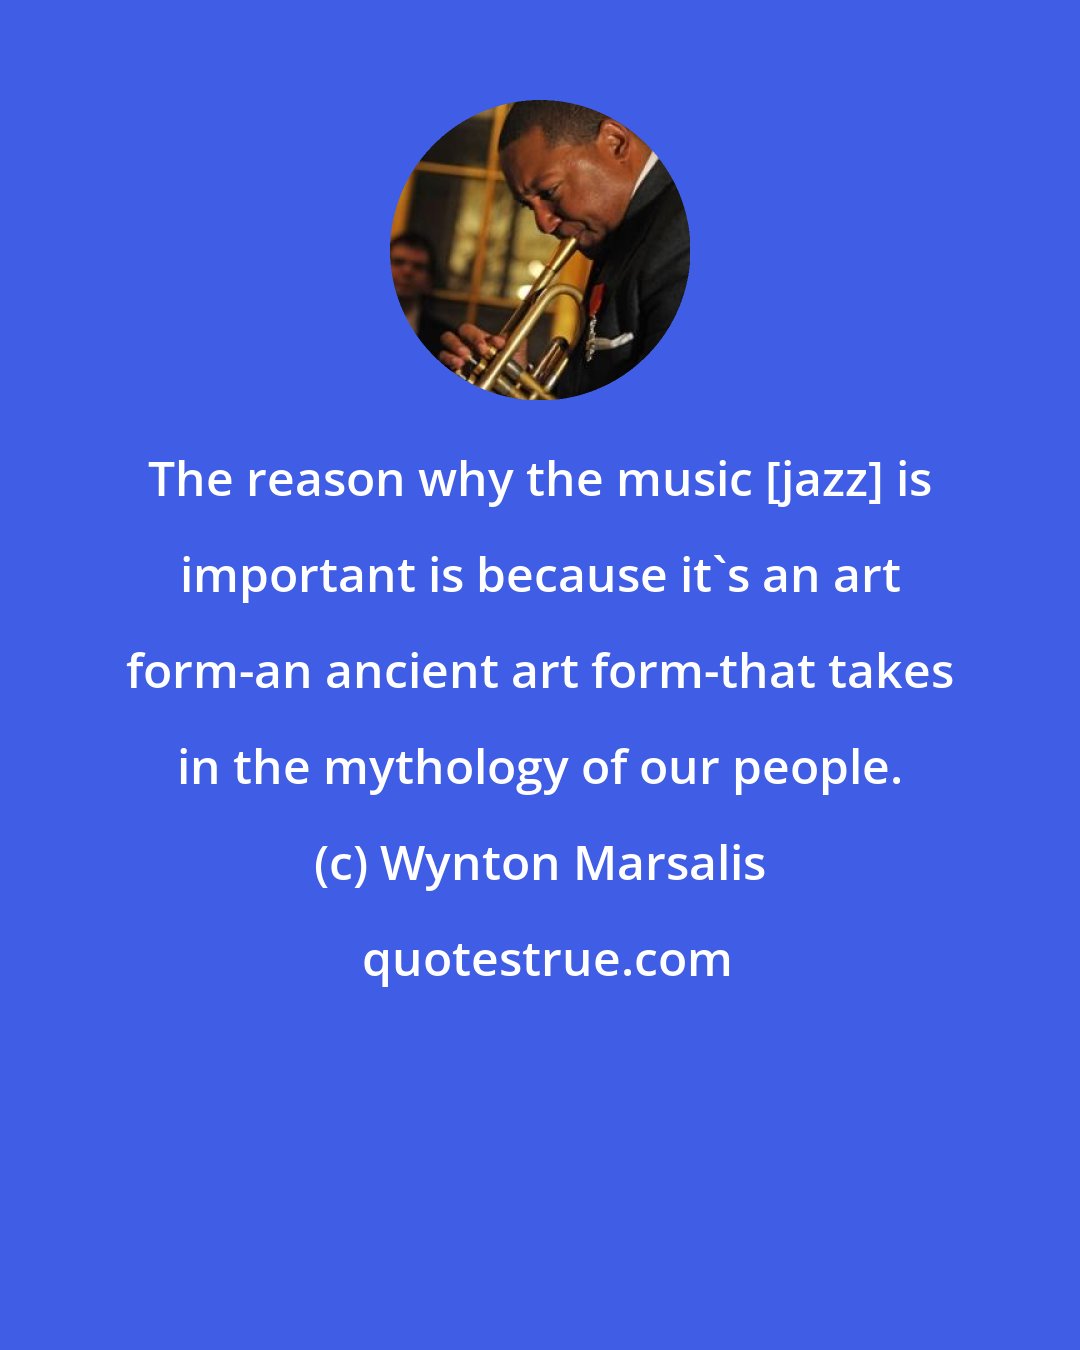 Wynton Marsalis: The reason why the music [jazz] is important is because it's an art form-an ancient art form-that takes in the mythology of our people.